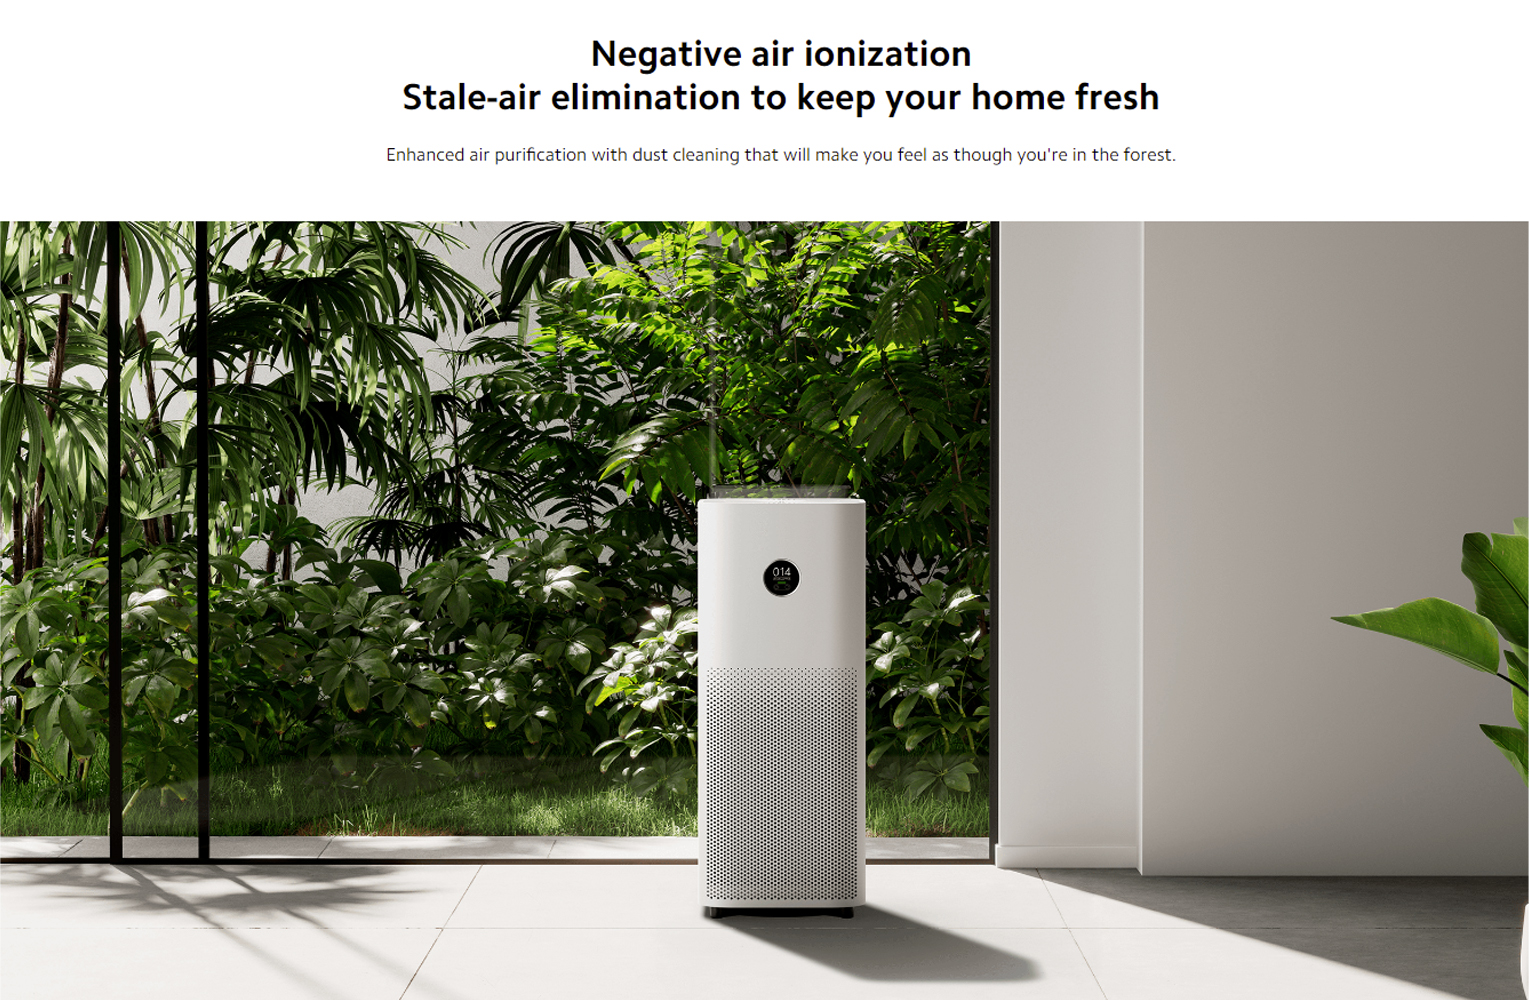 Xiaomi Smart Air Purifier 4 Pro Uk Appvoice Control Suitable For Large Room Cleaner Global Version 500 M3H Pm Cadr Oled Touch 7 Xiaomi &Lt;Table Class=&Quot;A-Normal A-Spacing-Micro&Quot;&Gt; &Lt;Tbody&Gt; &Lt;Tr Class=&Quot;A-Spacing-Small Po-Color&Quot;&Gt; &Lt;Td Class=&Quot;A-Span3&Quot;&Gt;&Lt;Span Class=&Quot;A-Size-Base A-Text-Bold&Quot;&Gt;Colour&Lt;/Span&Gt;&Lt;/Td&Gt; &Lt;Td Class=&Quot;A-Span9&Quot;&Gt;&Lt;Span Class=&Quot;A-Size-Base Po-Break-Word&Quot;&Gt;White&Lt;/Span&Gt;&Lt;/Td&Gt; &Lt;/Tr&Gt; &Lt;Tr Class=&Quot;A-Spacing-Small Po-Brand&Quot;&Gt; &Lt;Td Class=&Quot;A-Span3&Quot;&Gt;&Lt;Span Class=&Quot;A-Size-Base A-Text-Bold&Quot;&Gt;Brand&Lt;/Span&Gt;&Lt;/Td&Gt; &Lt;Td Class=&Quot;A-Span9&Quot;&Gt;&Lt;Span Class=&Quot;A-Size-Base Po-Break-Word&Quot;&Gt;Xiaomi&Lt;/Span&Gt;&Lt;/Td&Gt; &Lt;/Tr&Gt; &Lt;Tr Class=&Quot;A-Spacing-Small Po-Item_Depth_Width_Height&Quot;&Gt; &Lt;Td Class=&Quot;A-Span3&Quot;&Gt;&Lt;Span Class=&Quot;A-Size-Base A-Text-Bold&Quot;&Gt;Product Dimensions&Lt;/Span&Gt;&Lt;/Td&Gt; &Lt;Td Class=&Quot;A-Span9&Quot;&Gt;&Lt;Span Class=&Quot;A-Size-Base Po-Break-Word&Quot;&Gt;27.5D X 27.5W X 68H Centimeters&Lt;/Span&Gt;&Lt;/Td&Gt; &Lt;/Tr&Gt; &Lt;Tr Class=&Quot;A-Spacing-Small Po-Power_Source_Type&Quot;&Gt; &Lt;Td Class=&Quot;A-Span3&Quot;&Gt;&Lt;Span Class=&Quot;A-Size-Base A-Text-Bold&Quot;&Gt;Power Source&Lt;/Span&Gt;&Lt;/Td&Gt; &Lt;Td Class=&Quot;A-Span9&Quot;&Gt;&Lt;Span Class=&Quot;A-Size-Base Po-Break-Word&Quot;&Gt;Corded Electric&Lt;/Span&Gt;&Lt;/Td&Gt; &Lt;/Tr&Gt; &Lt;Tr Class=&Quot;A-Spacing-Small Po-Item_Weight&Quot;&Gt; &Lt;Td Class=&Quot;A-Span3&Quot;&Gt;&Lt;Span Class=&Quot;A-Size-Base A-Text-Bold&Quot;&Gt;Item Weight&Lt;/Span&Gt;&Lt;/Td&Gt; &Lt;Td Class=&Quot;A-Span9&Quot;&Gt;&Lt;Span Class=&Quot;A-Size-Base Po-Break-Word&Quot;&Gt;6.8 Kilograms&Lt;/Span&Gt;&Lt;/Td&Gt; &Lt;/Tr&Gt; &Lt;/Tbody&Gt; &Lt;/Table&Gt; &Lt;H5&Gt;We Also Provide International Wholesale And Retail Shipping To All Gcc Countries: Saudi Arabia, Qatar, Oman, Kuwait, Bahrain.&Lt;/H5&Gt; Xiaomi Xiaomi Smart Air Purifier 4 Pro